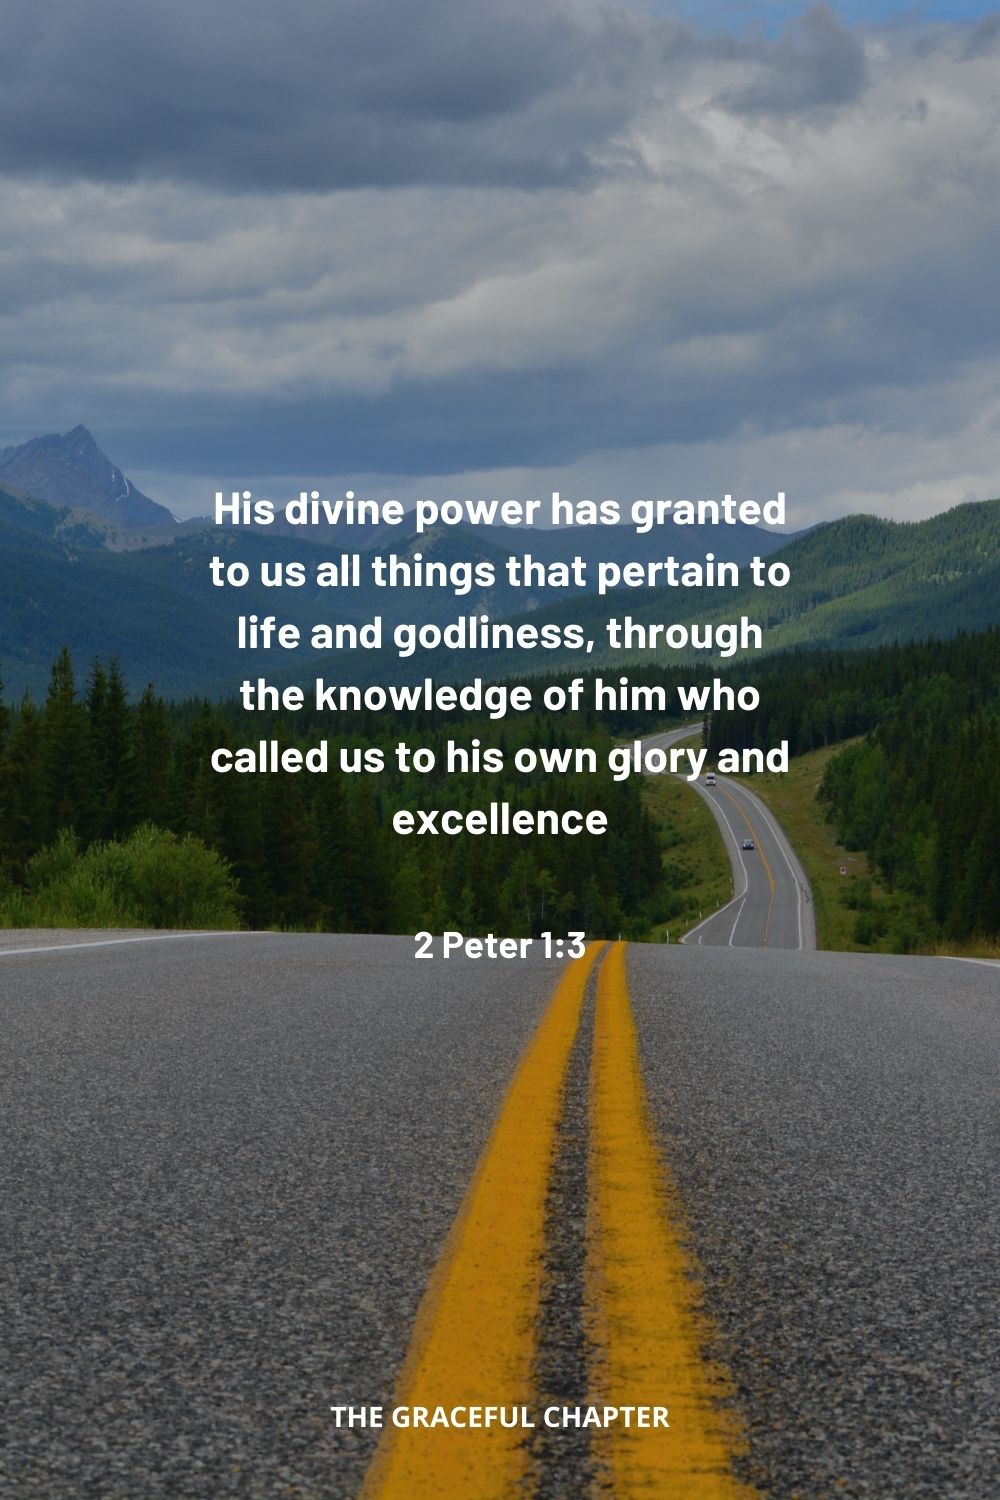 His divine power has granted to us all things that pertain to life and godliness, through the knowledge of him who called us to his own glory and excellence 2 Peter 1:3